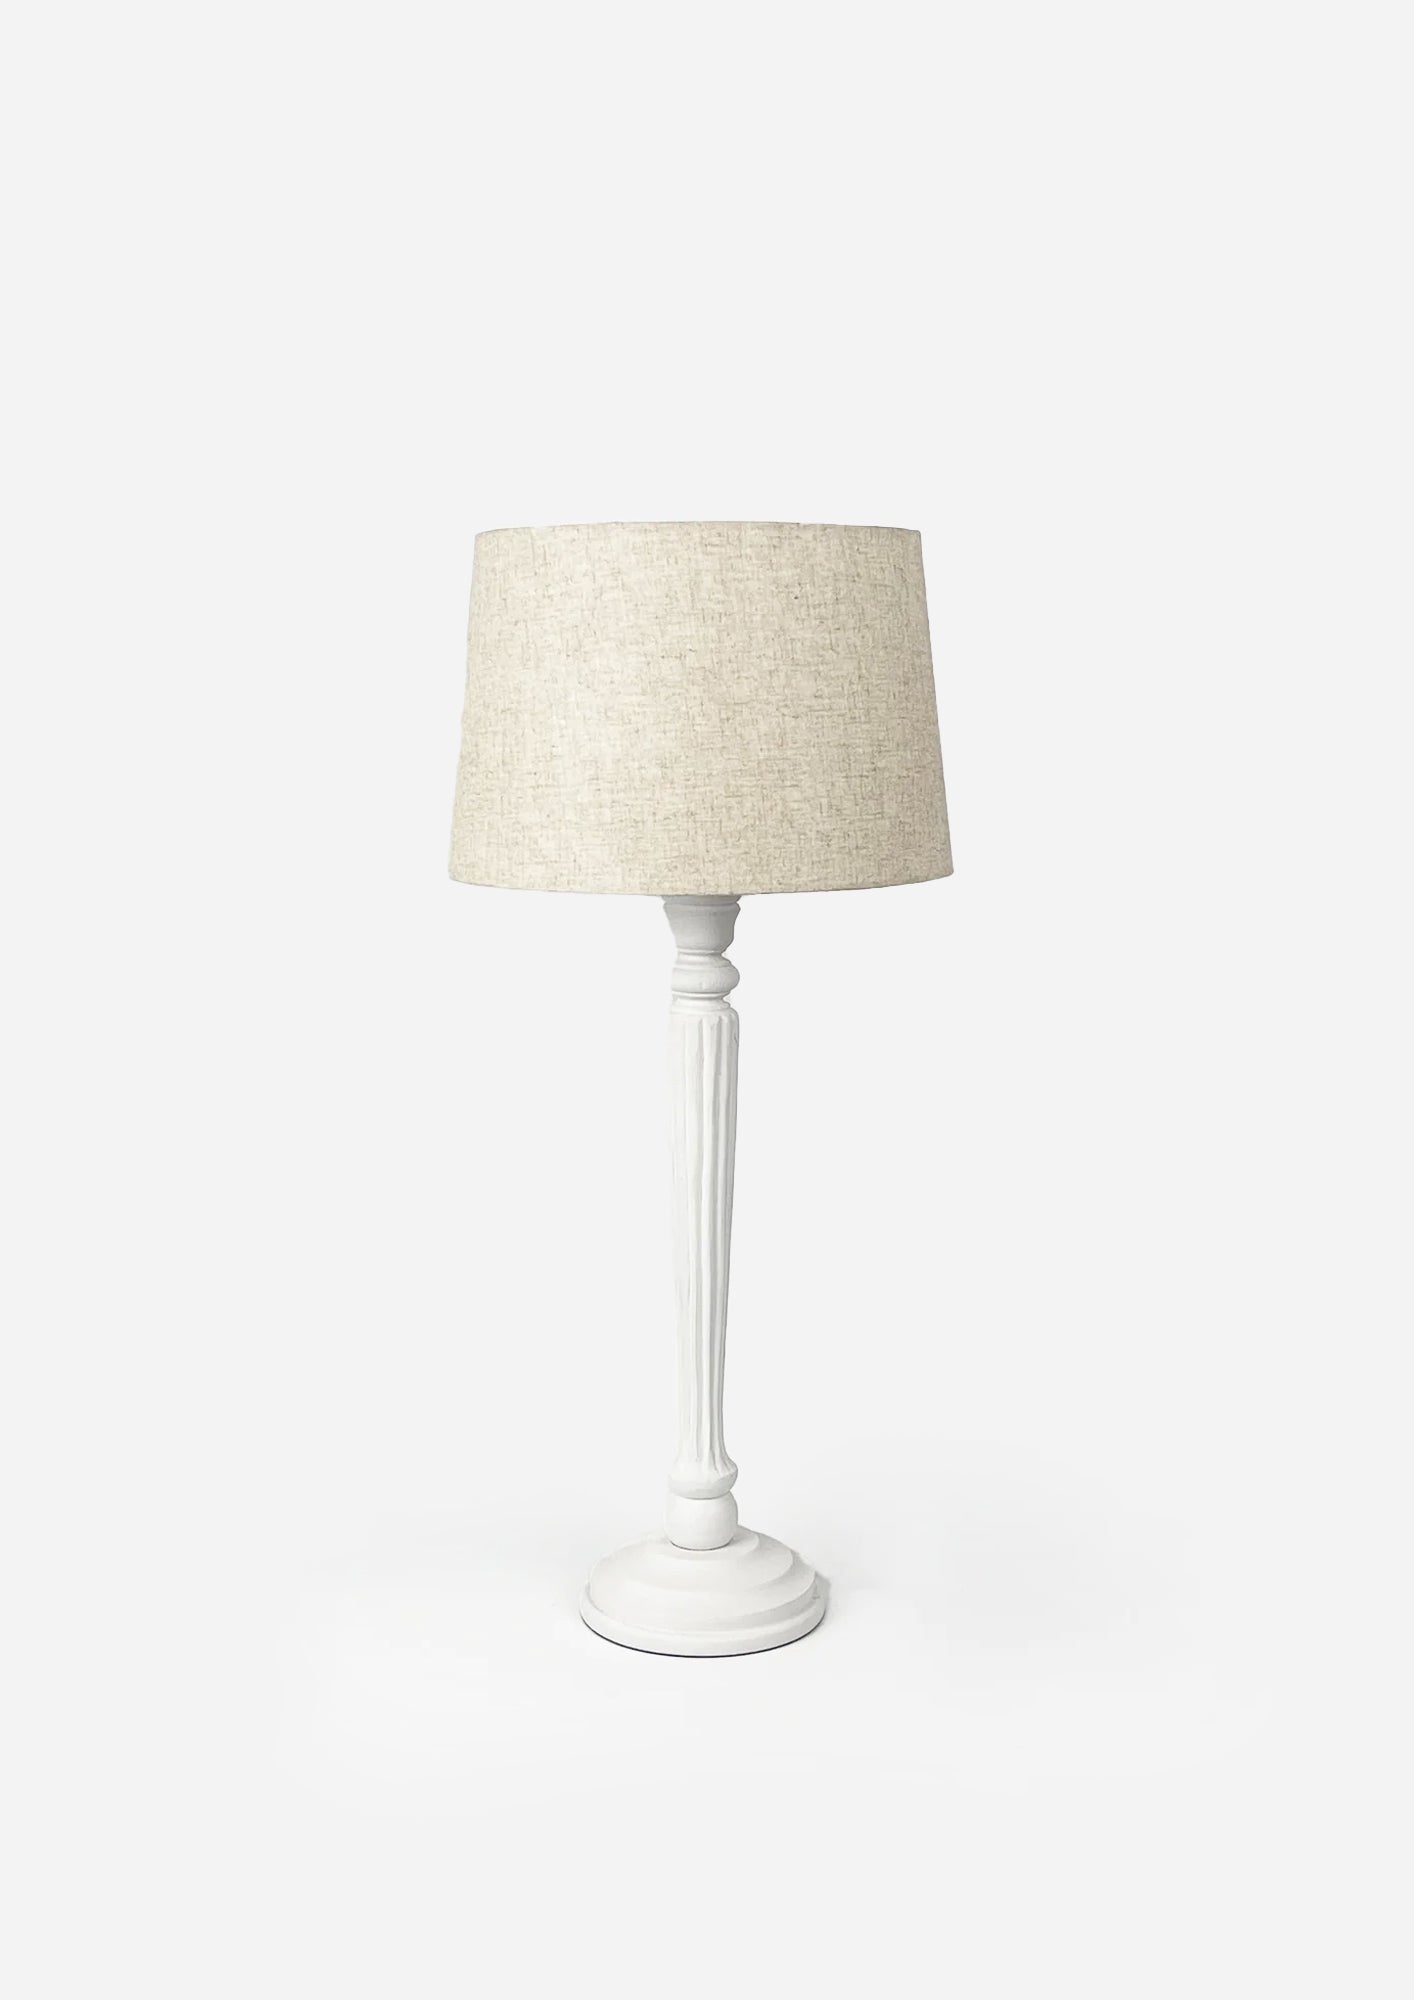 Juliette French Style Table Lamp